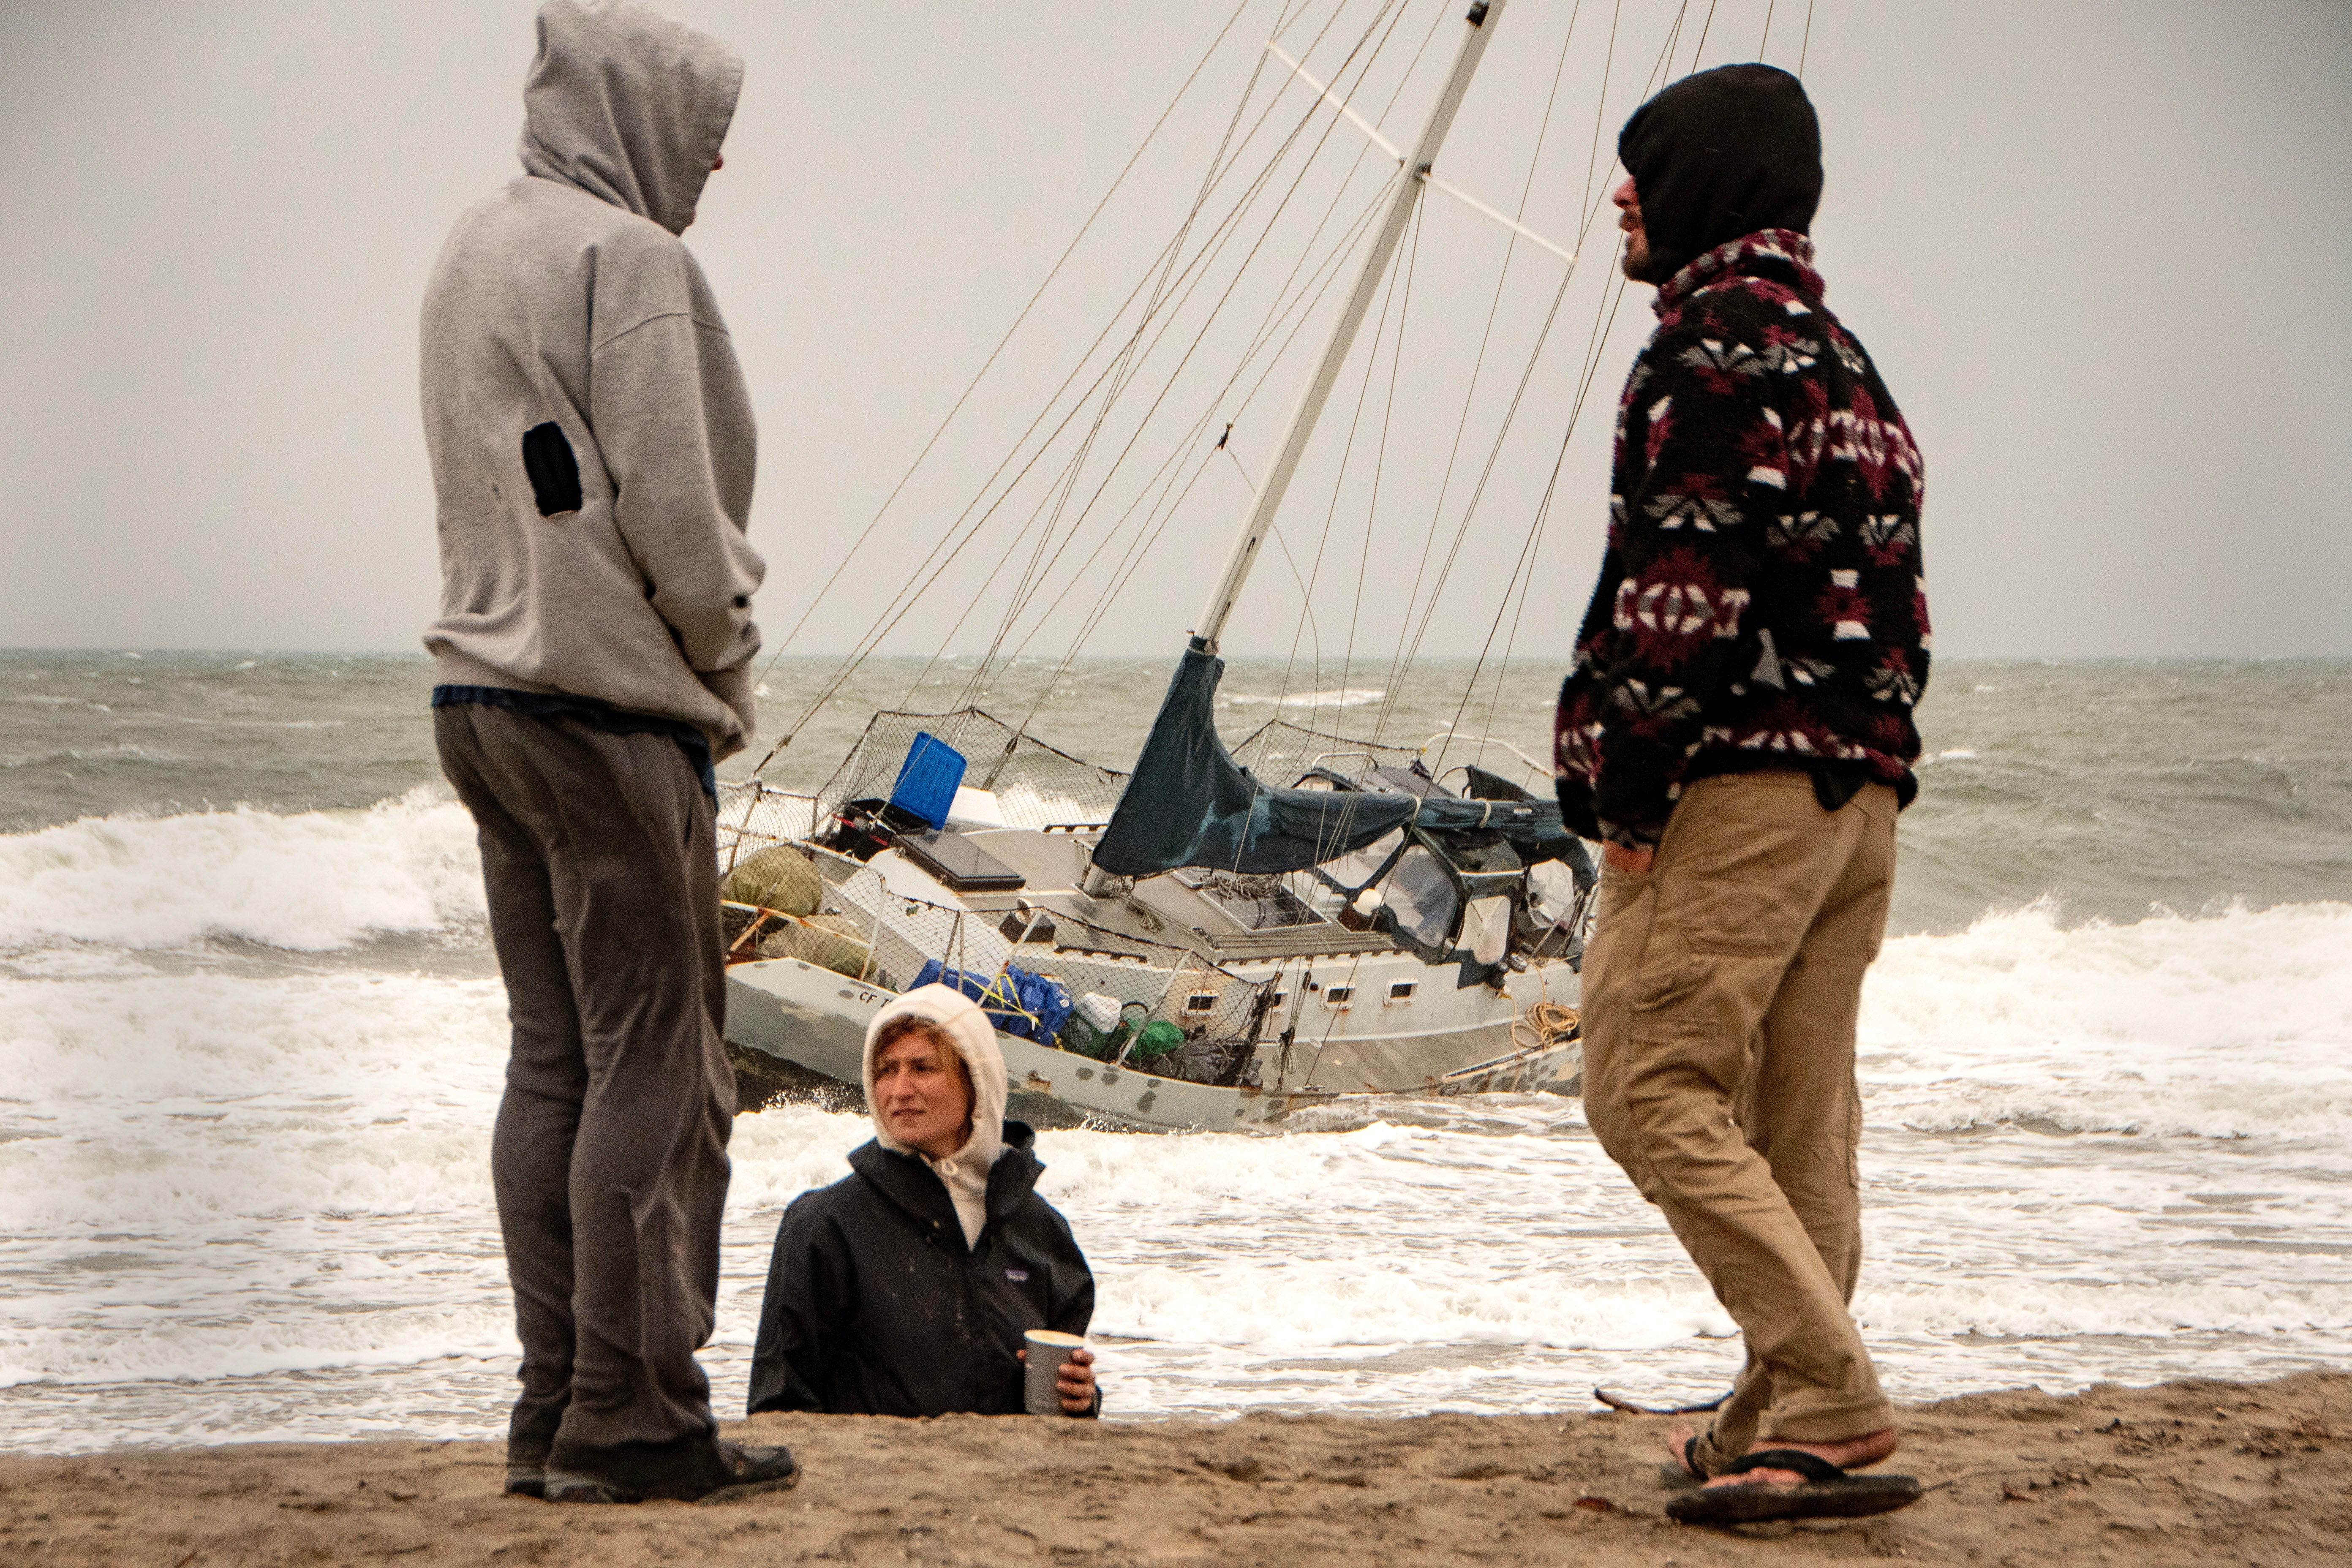 People stand next to a boat that washed ashore during an atmospheric river weather event in Santa Barbara, California